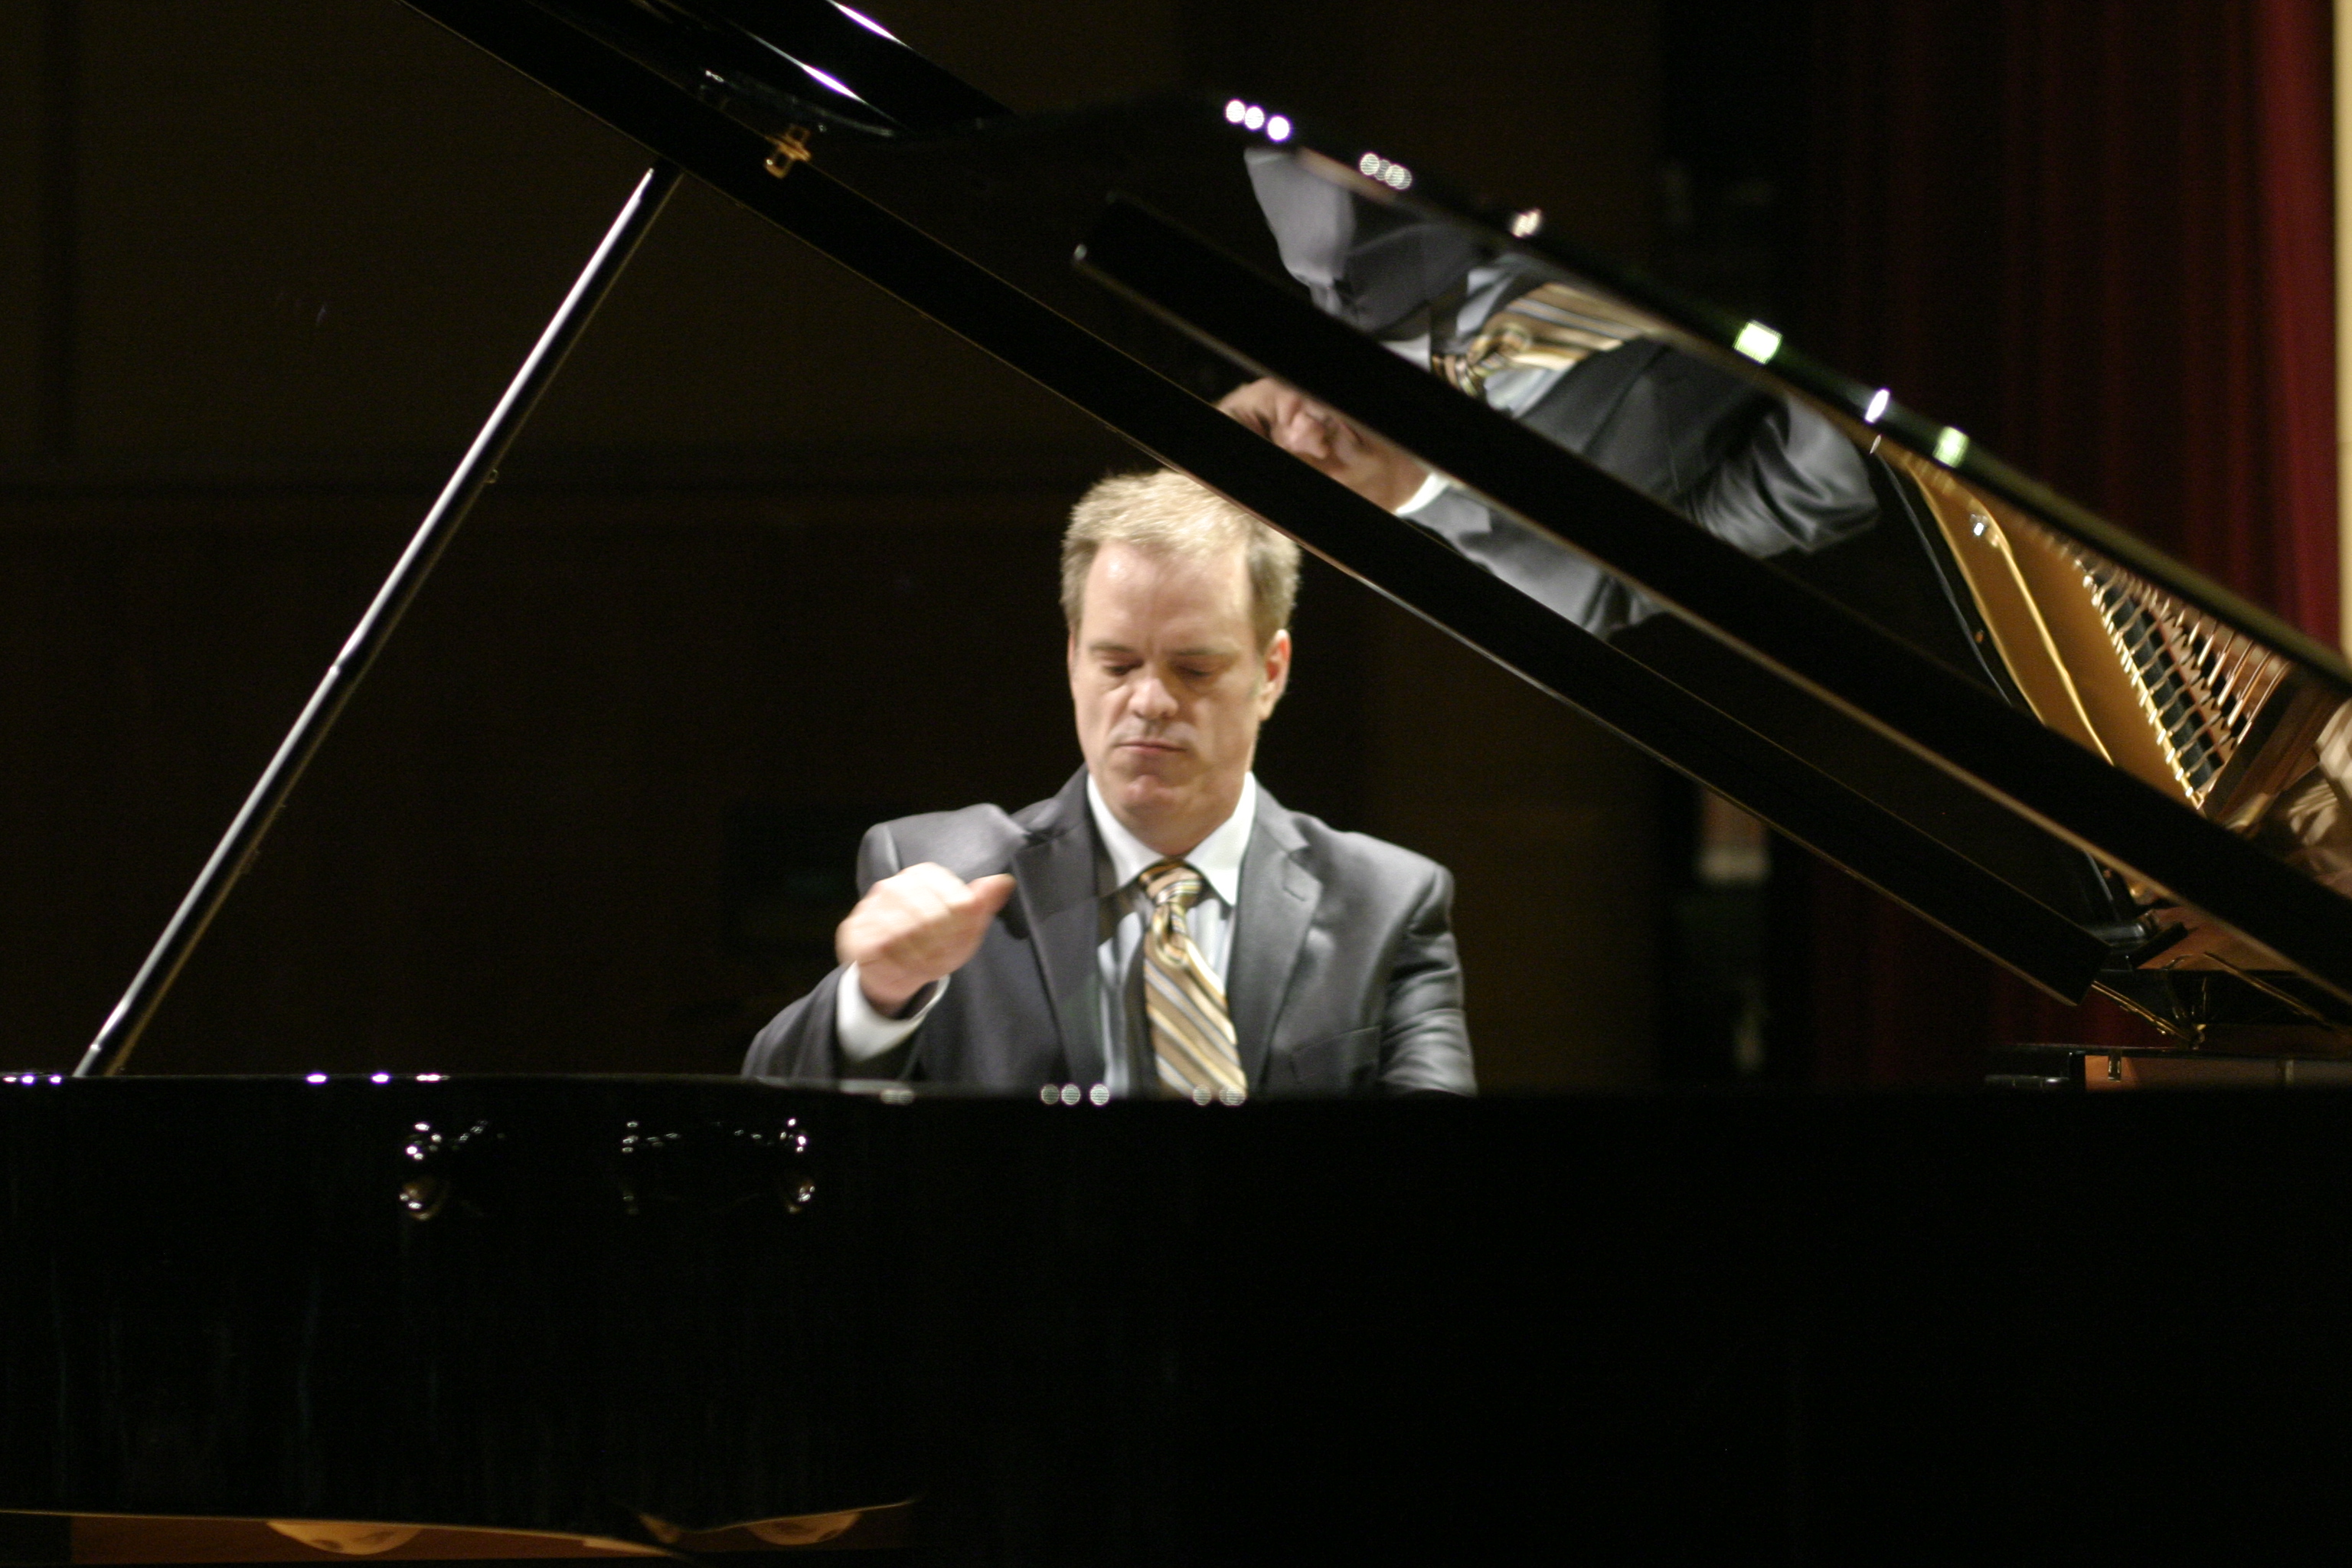 Clark Griffith, a retired database programmer from Texas, competes in the final round of the Sixth  International Piano Competition for Outstanding Amateurs hosted by the Van Cliburn Foundation in Fort Worth, Texas, Sunday, May 29, 2011. (Van Cliburn Foundation/Rodger Mallison)